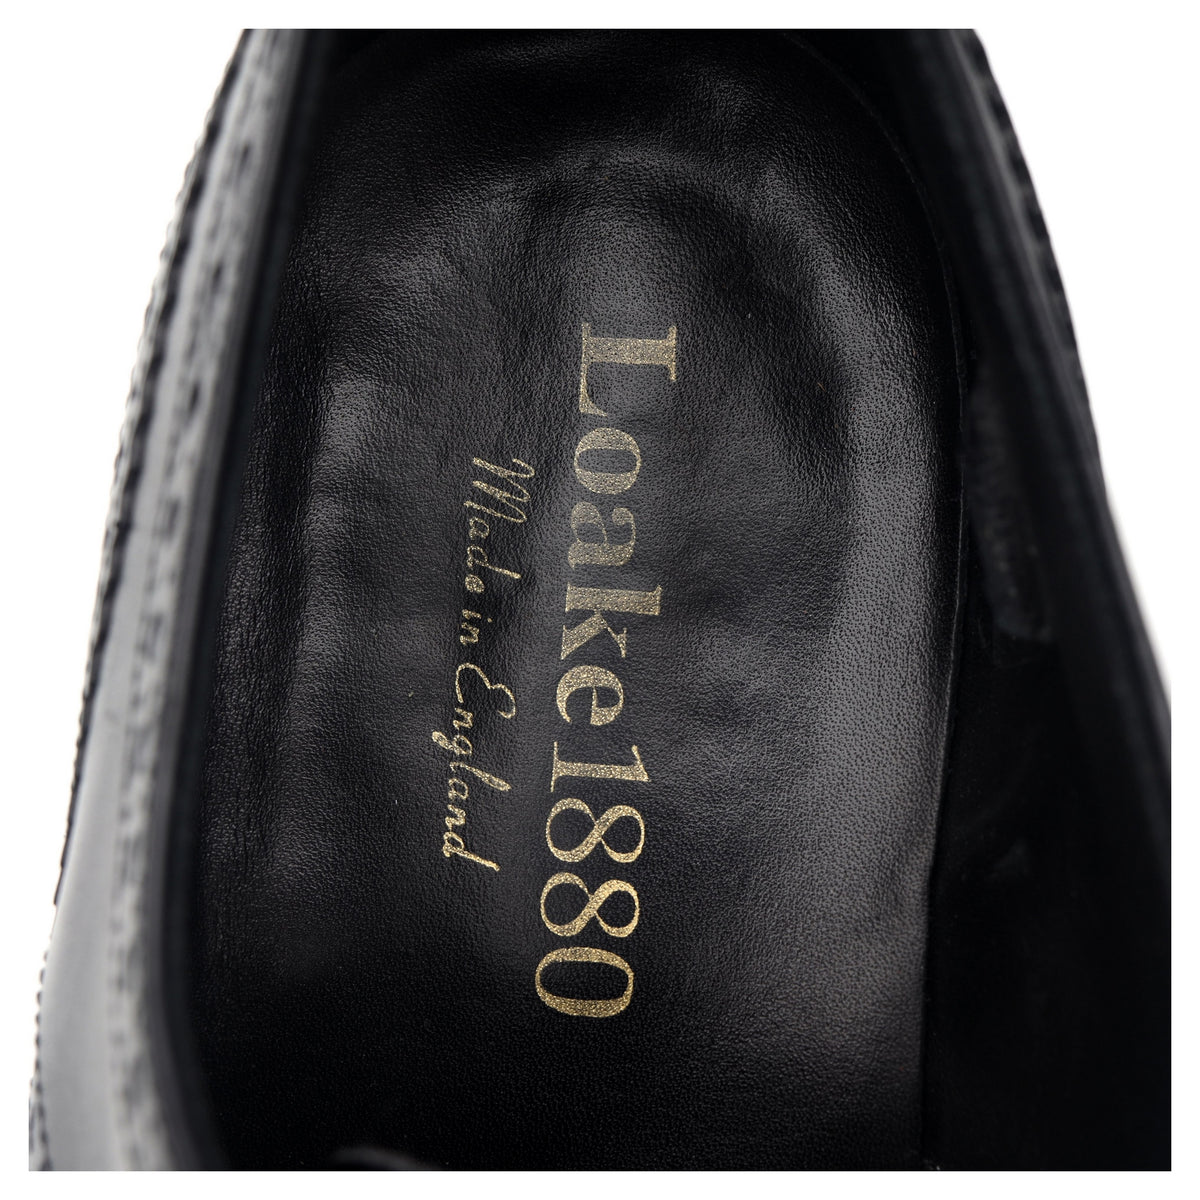 1880 'Woburn' Black Leather Derby Brogues UK 7.5 G - Abbot's Shoes